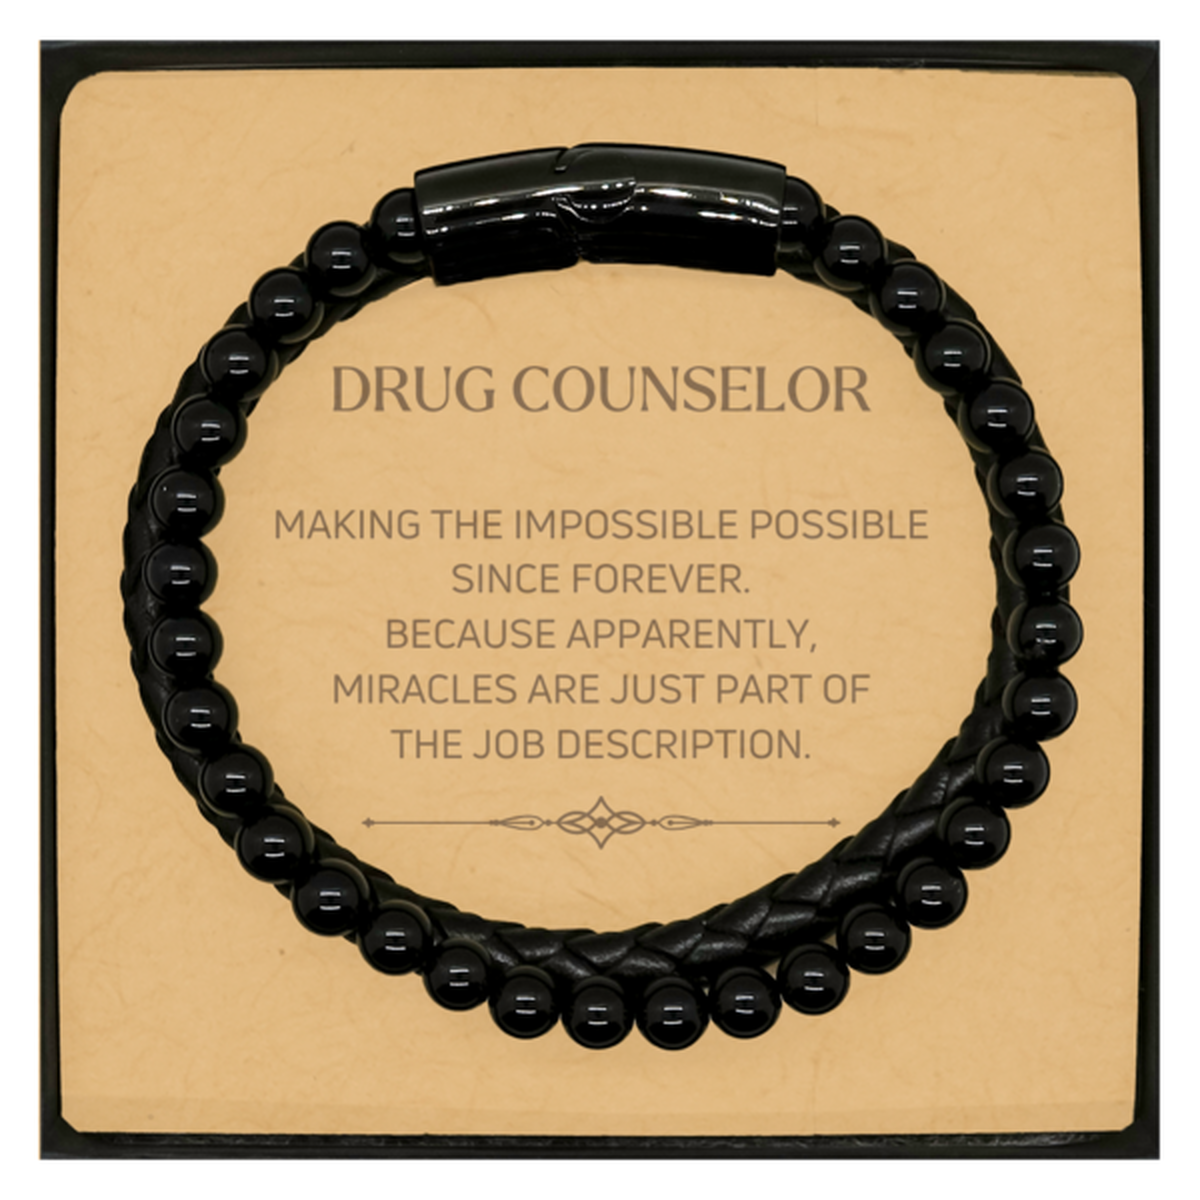 Funny Drug Counselor Gifts, Miracles are just part of the job description, Inspirational Birthday Christmas Stone Leather Bracelets For Drug Counselor, Men, Women, Coworkers, Friends, Boss